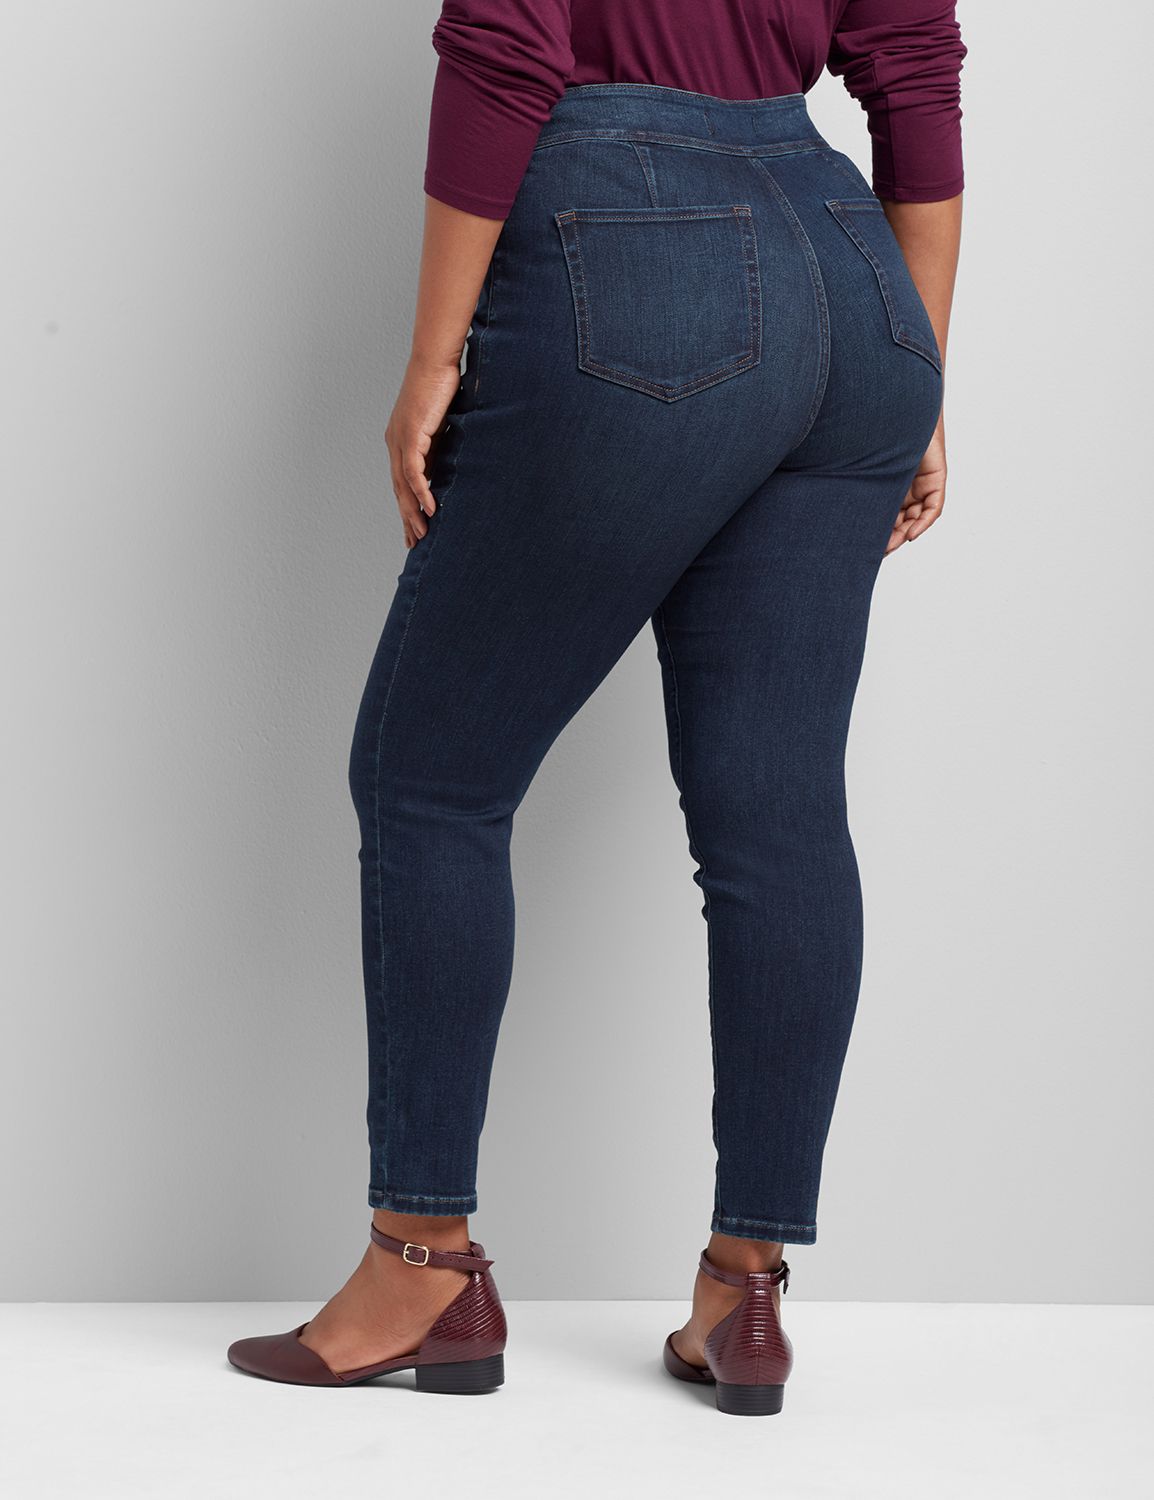 Lane Bryant Solid Blue Jeggings Size 22 (Plus) - 62% off